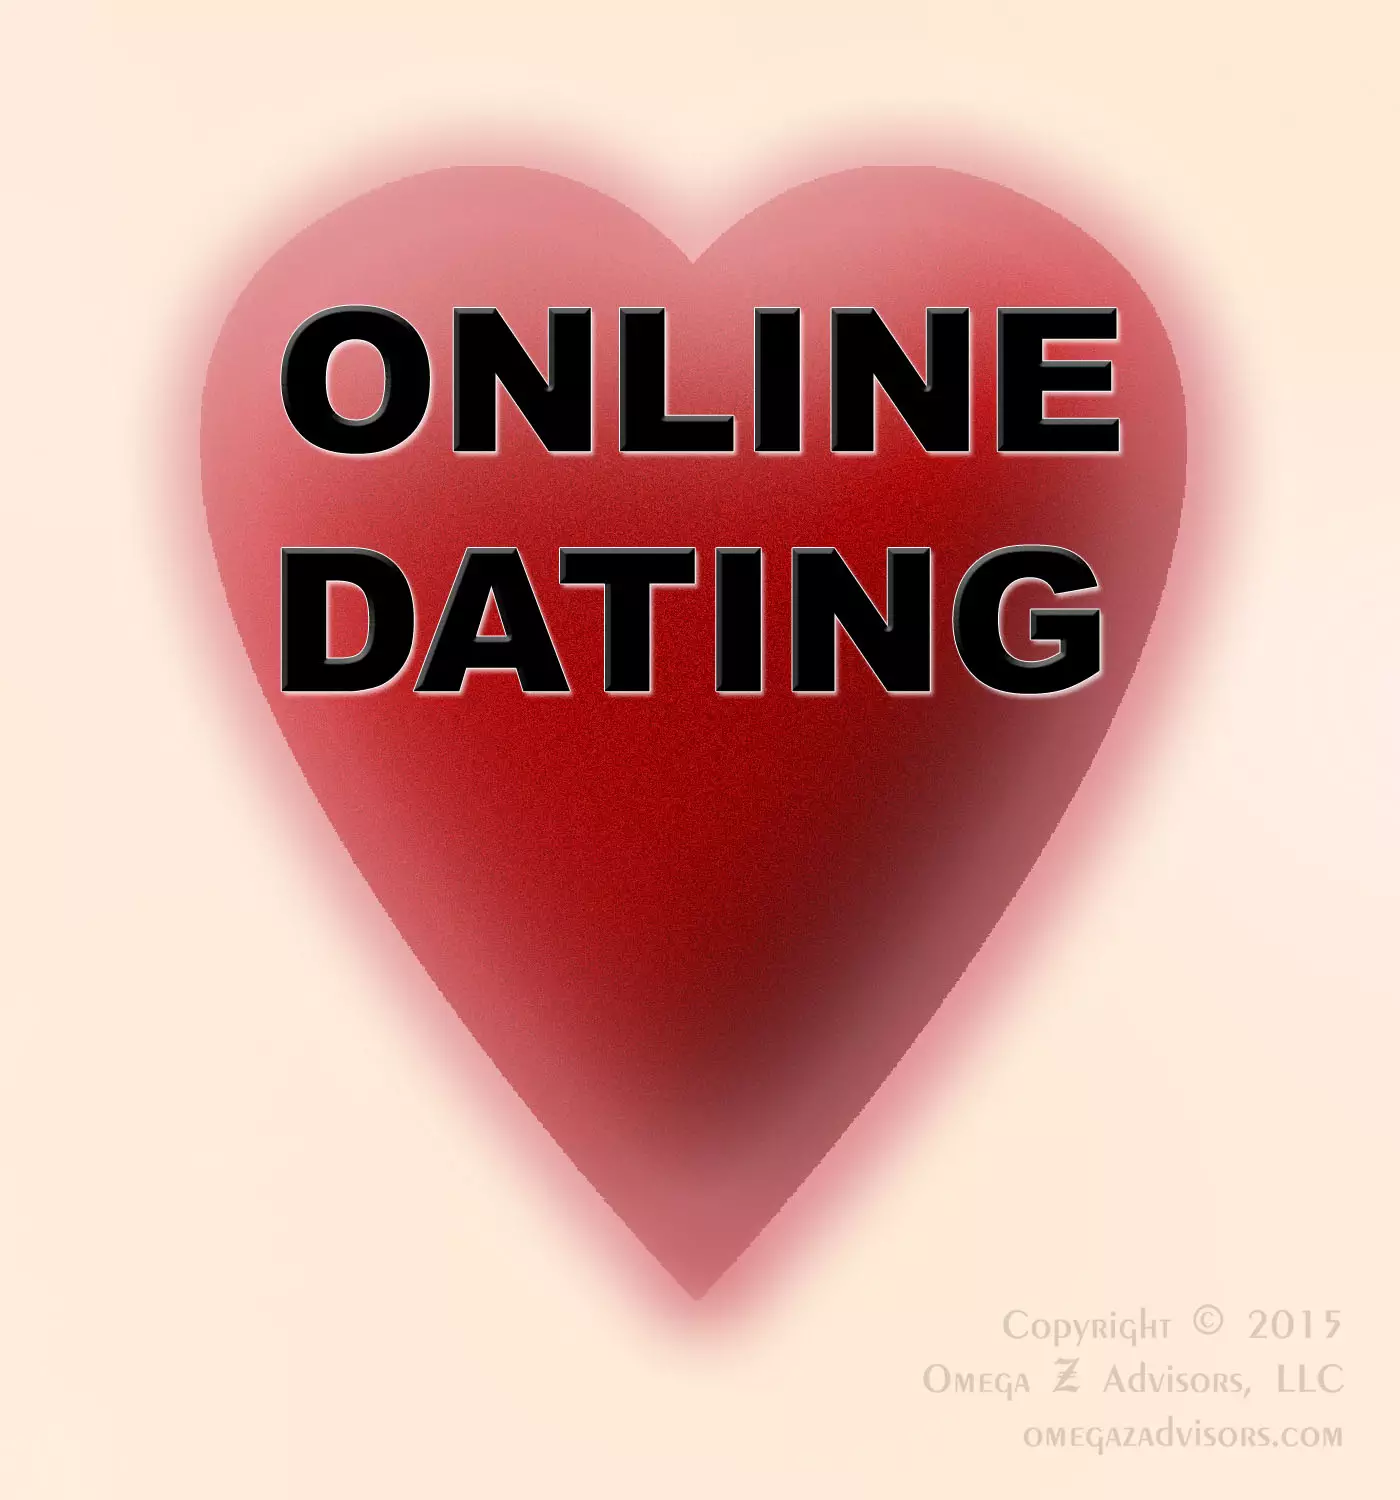 There are management lessons from online dating. 